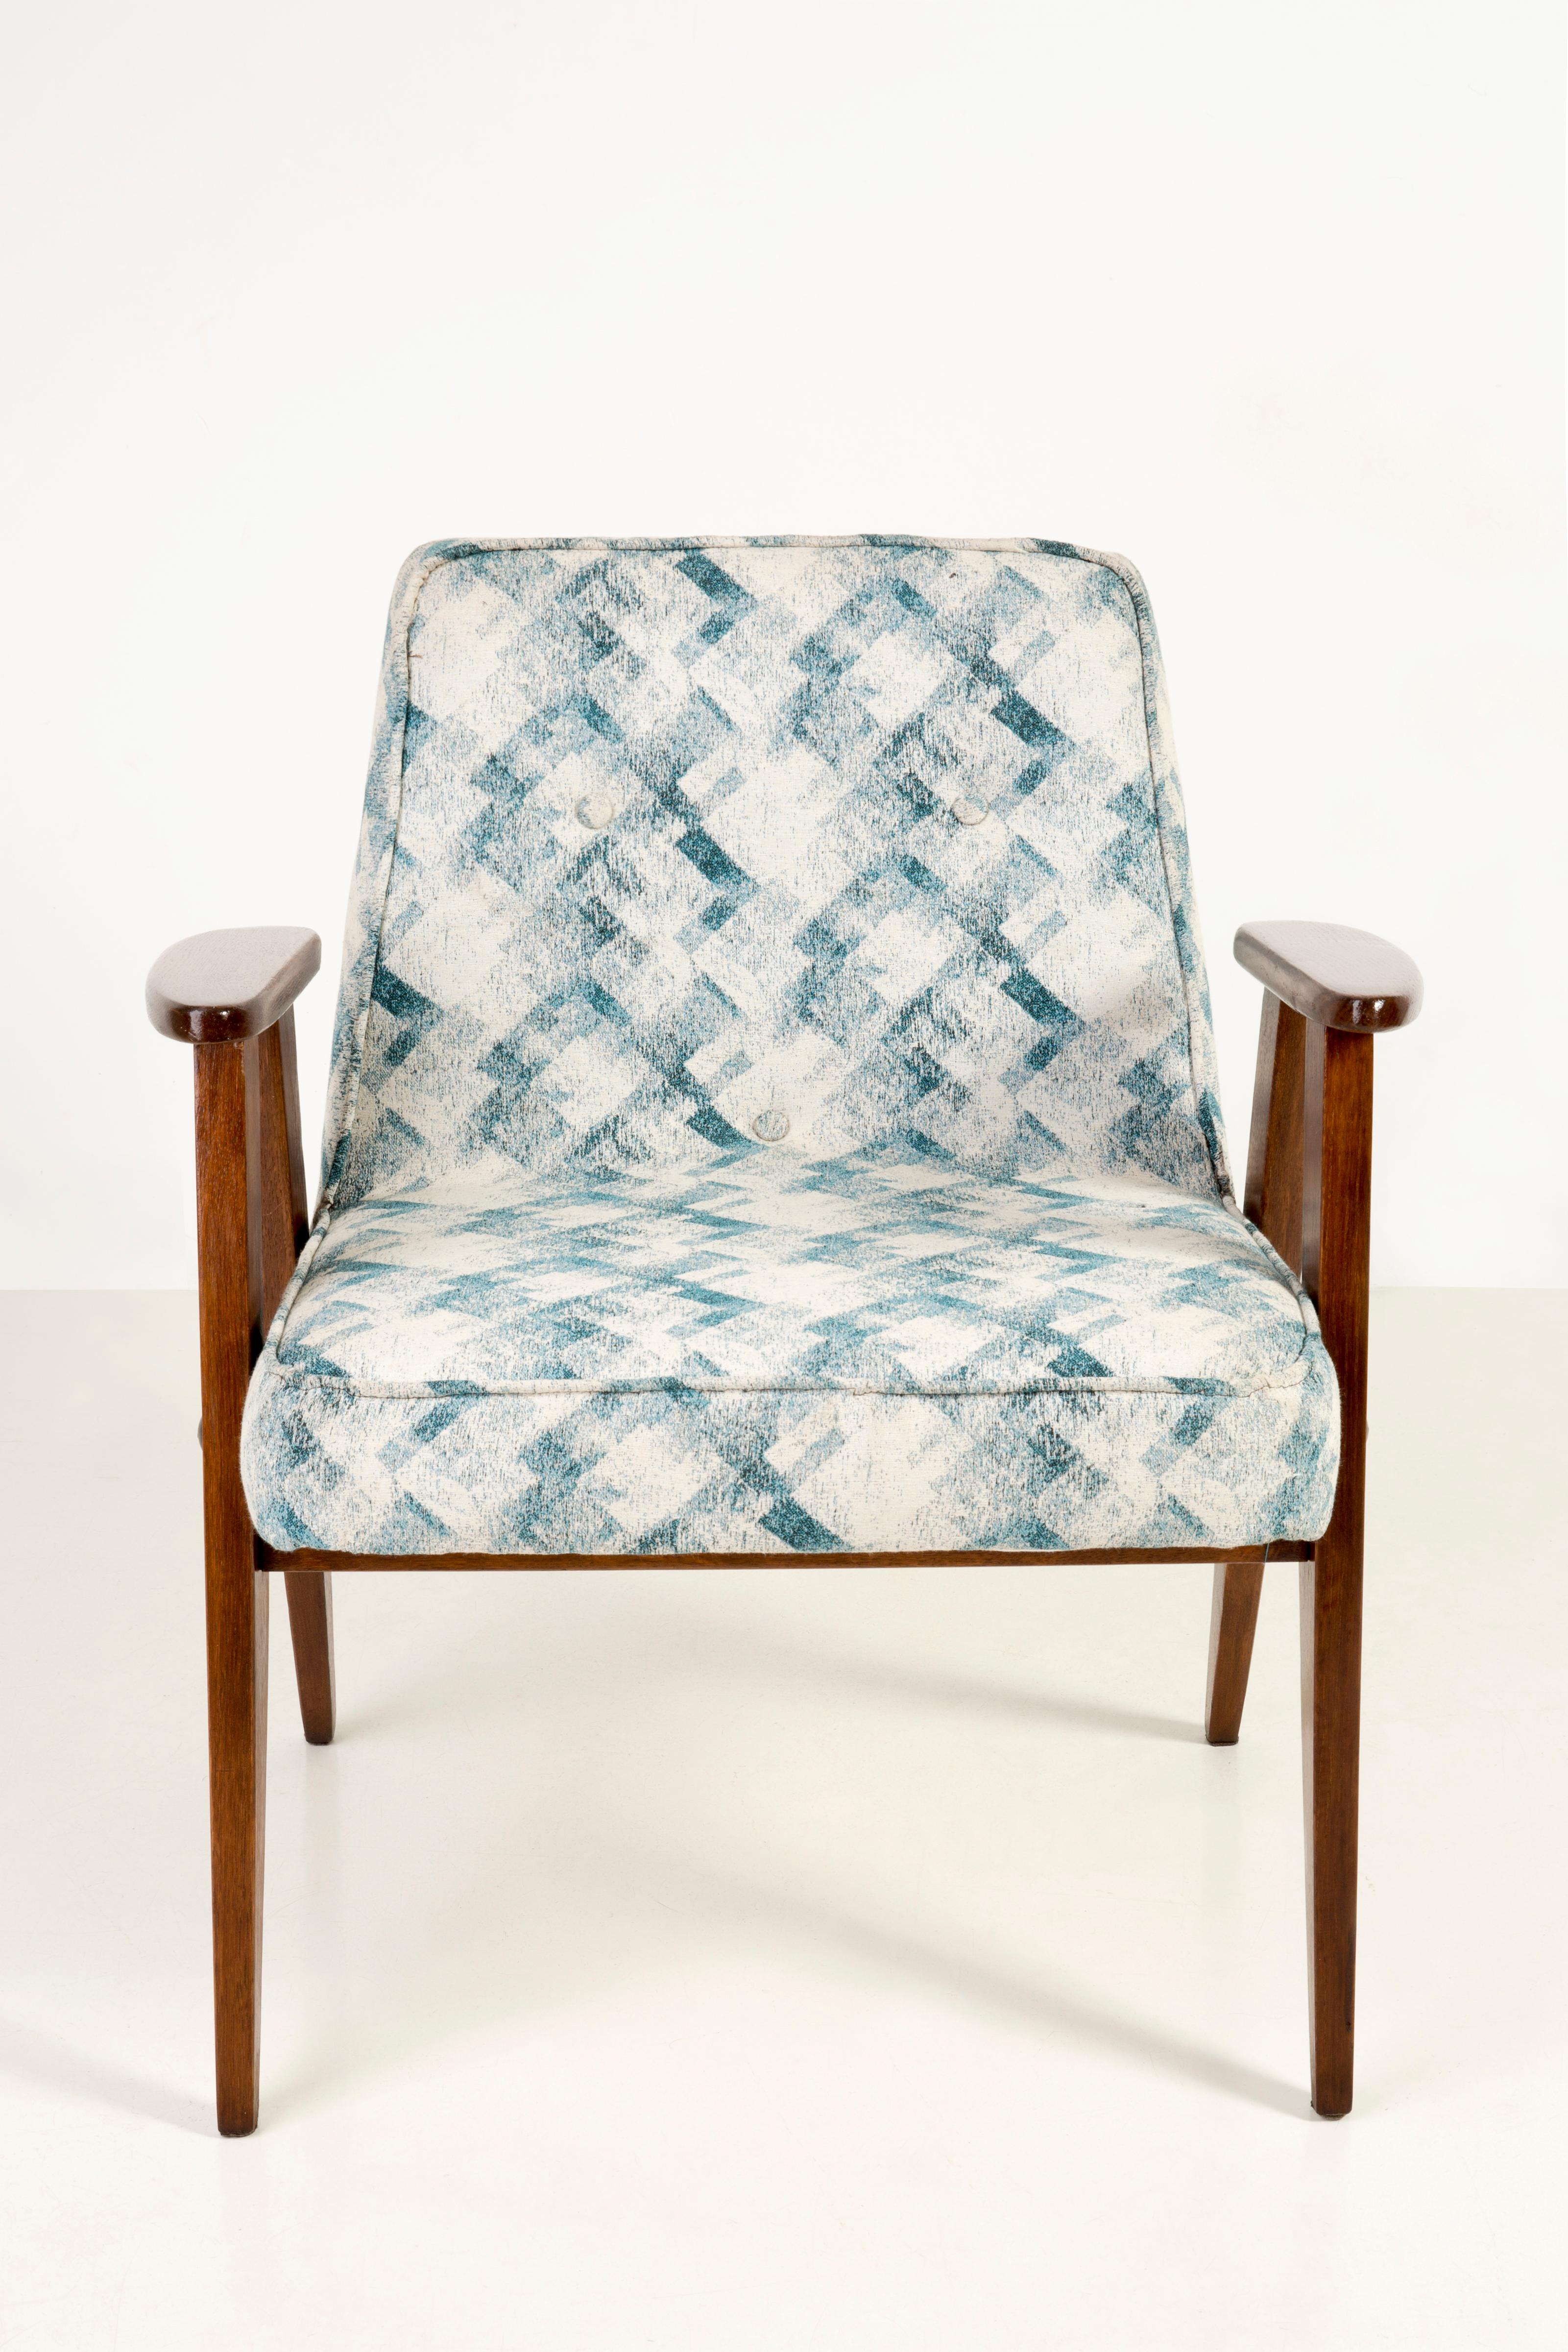 20th Century Set of Two-Light Green Pattern 366 Armchair, Jozef Chierowski, 1960s For Sale